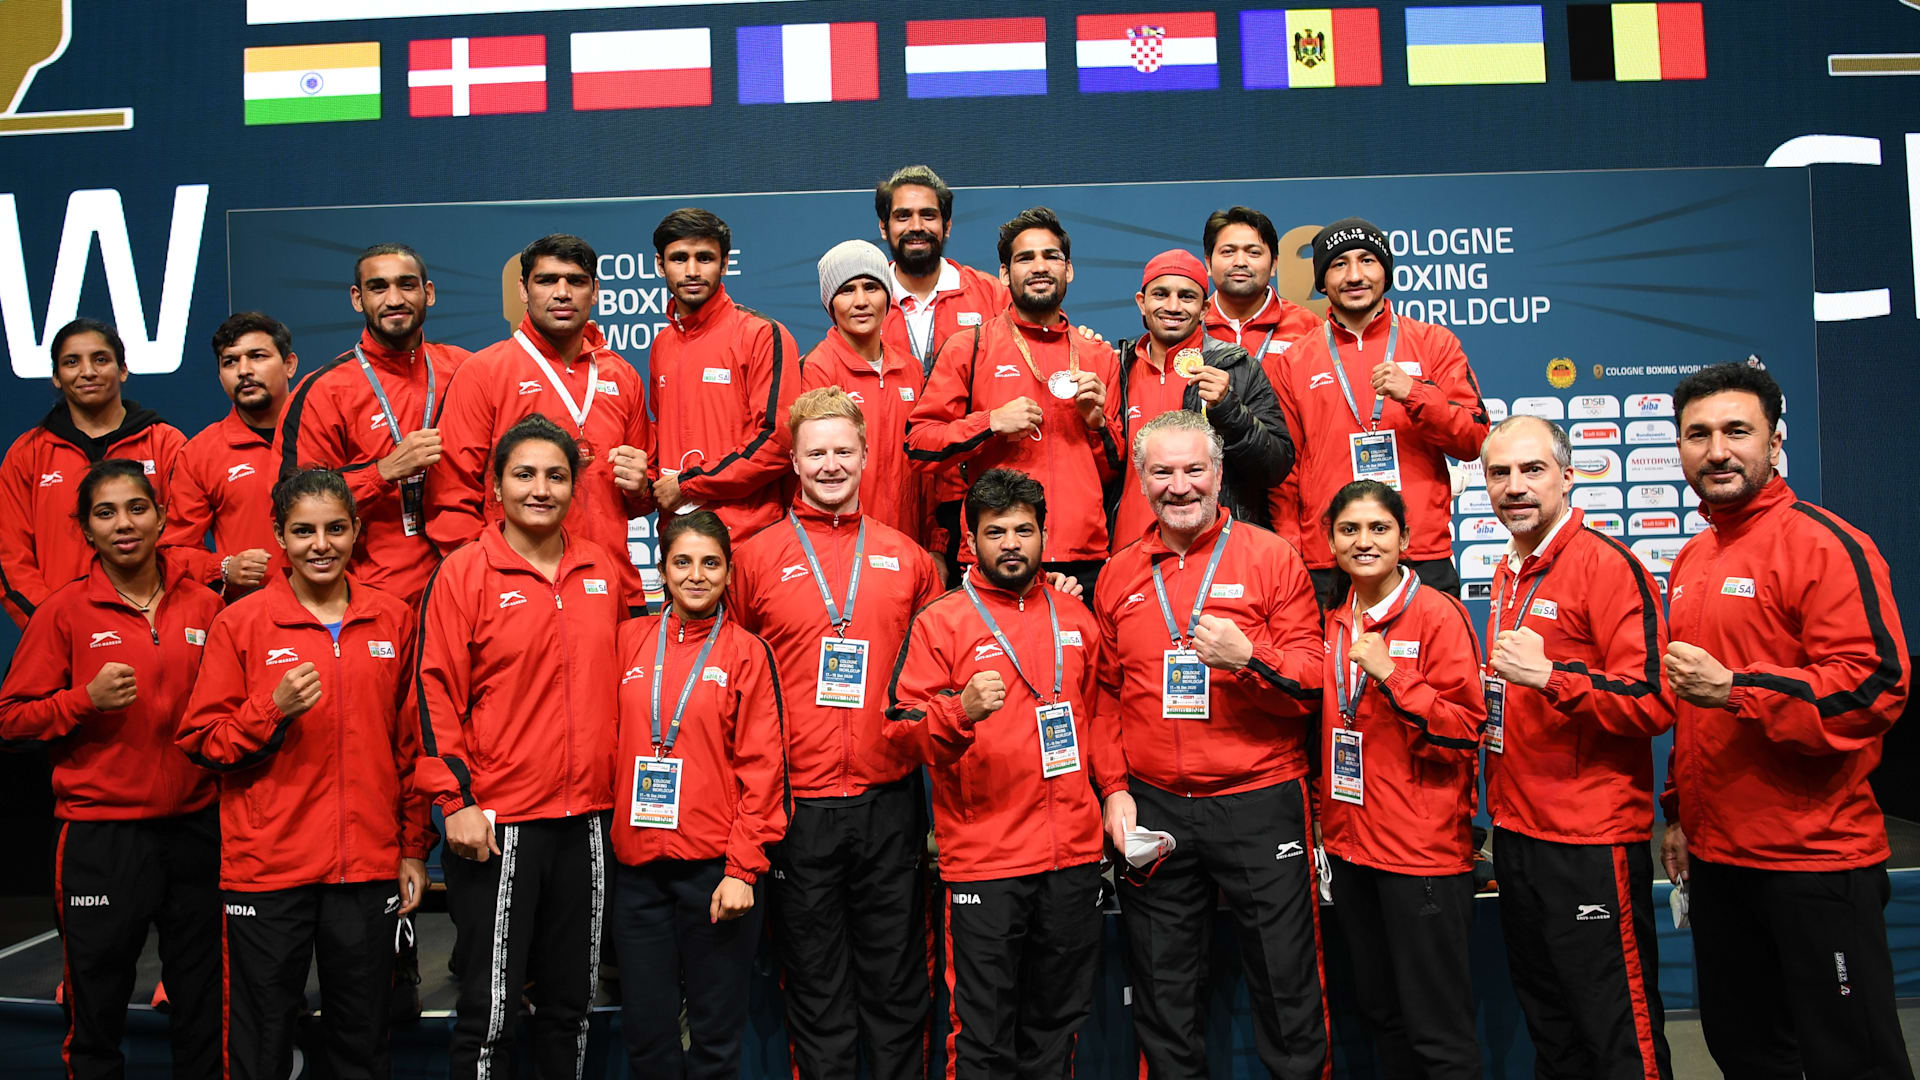 Indian Boxers bag 3 Gold at Cologne Boxing World Cup_50.1